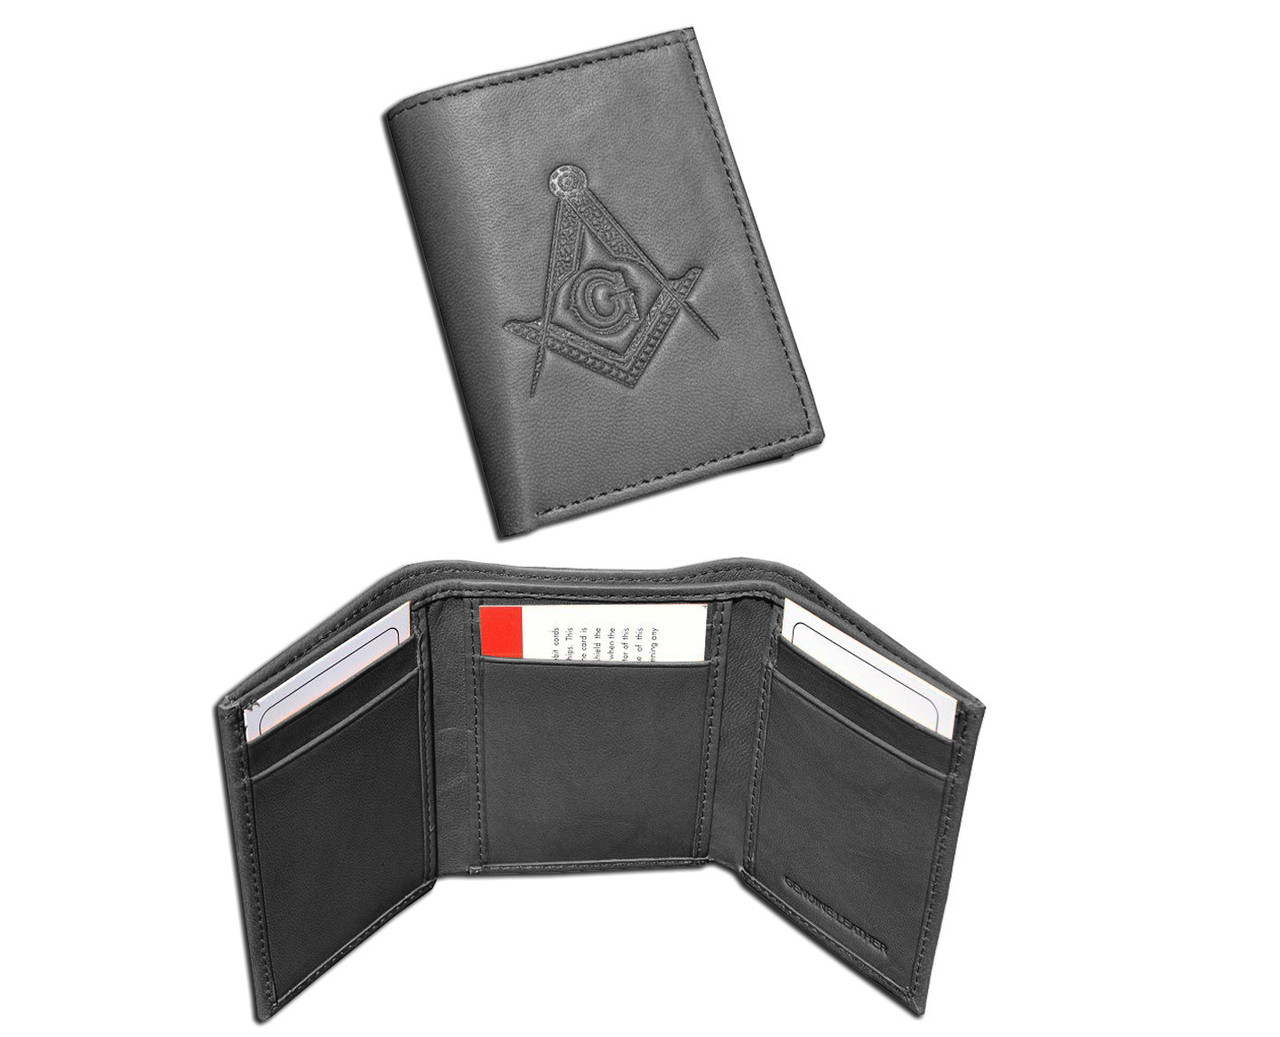  NMVAWIPT Unique Men's Genuine Leather Wallets, High Capacity  Trifold Slim Freemasons Vintage Short Wallet with Privacy Protection,  Masonic AG Symbol Card Holder Luxury Gift Purse,A,3.7“x4.7”x0.6“ :  Everything Else